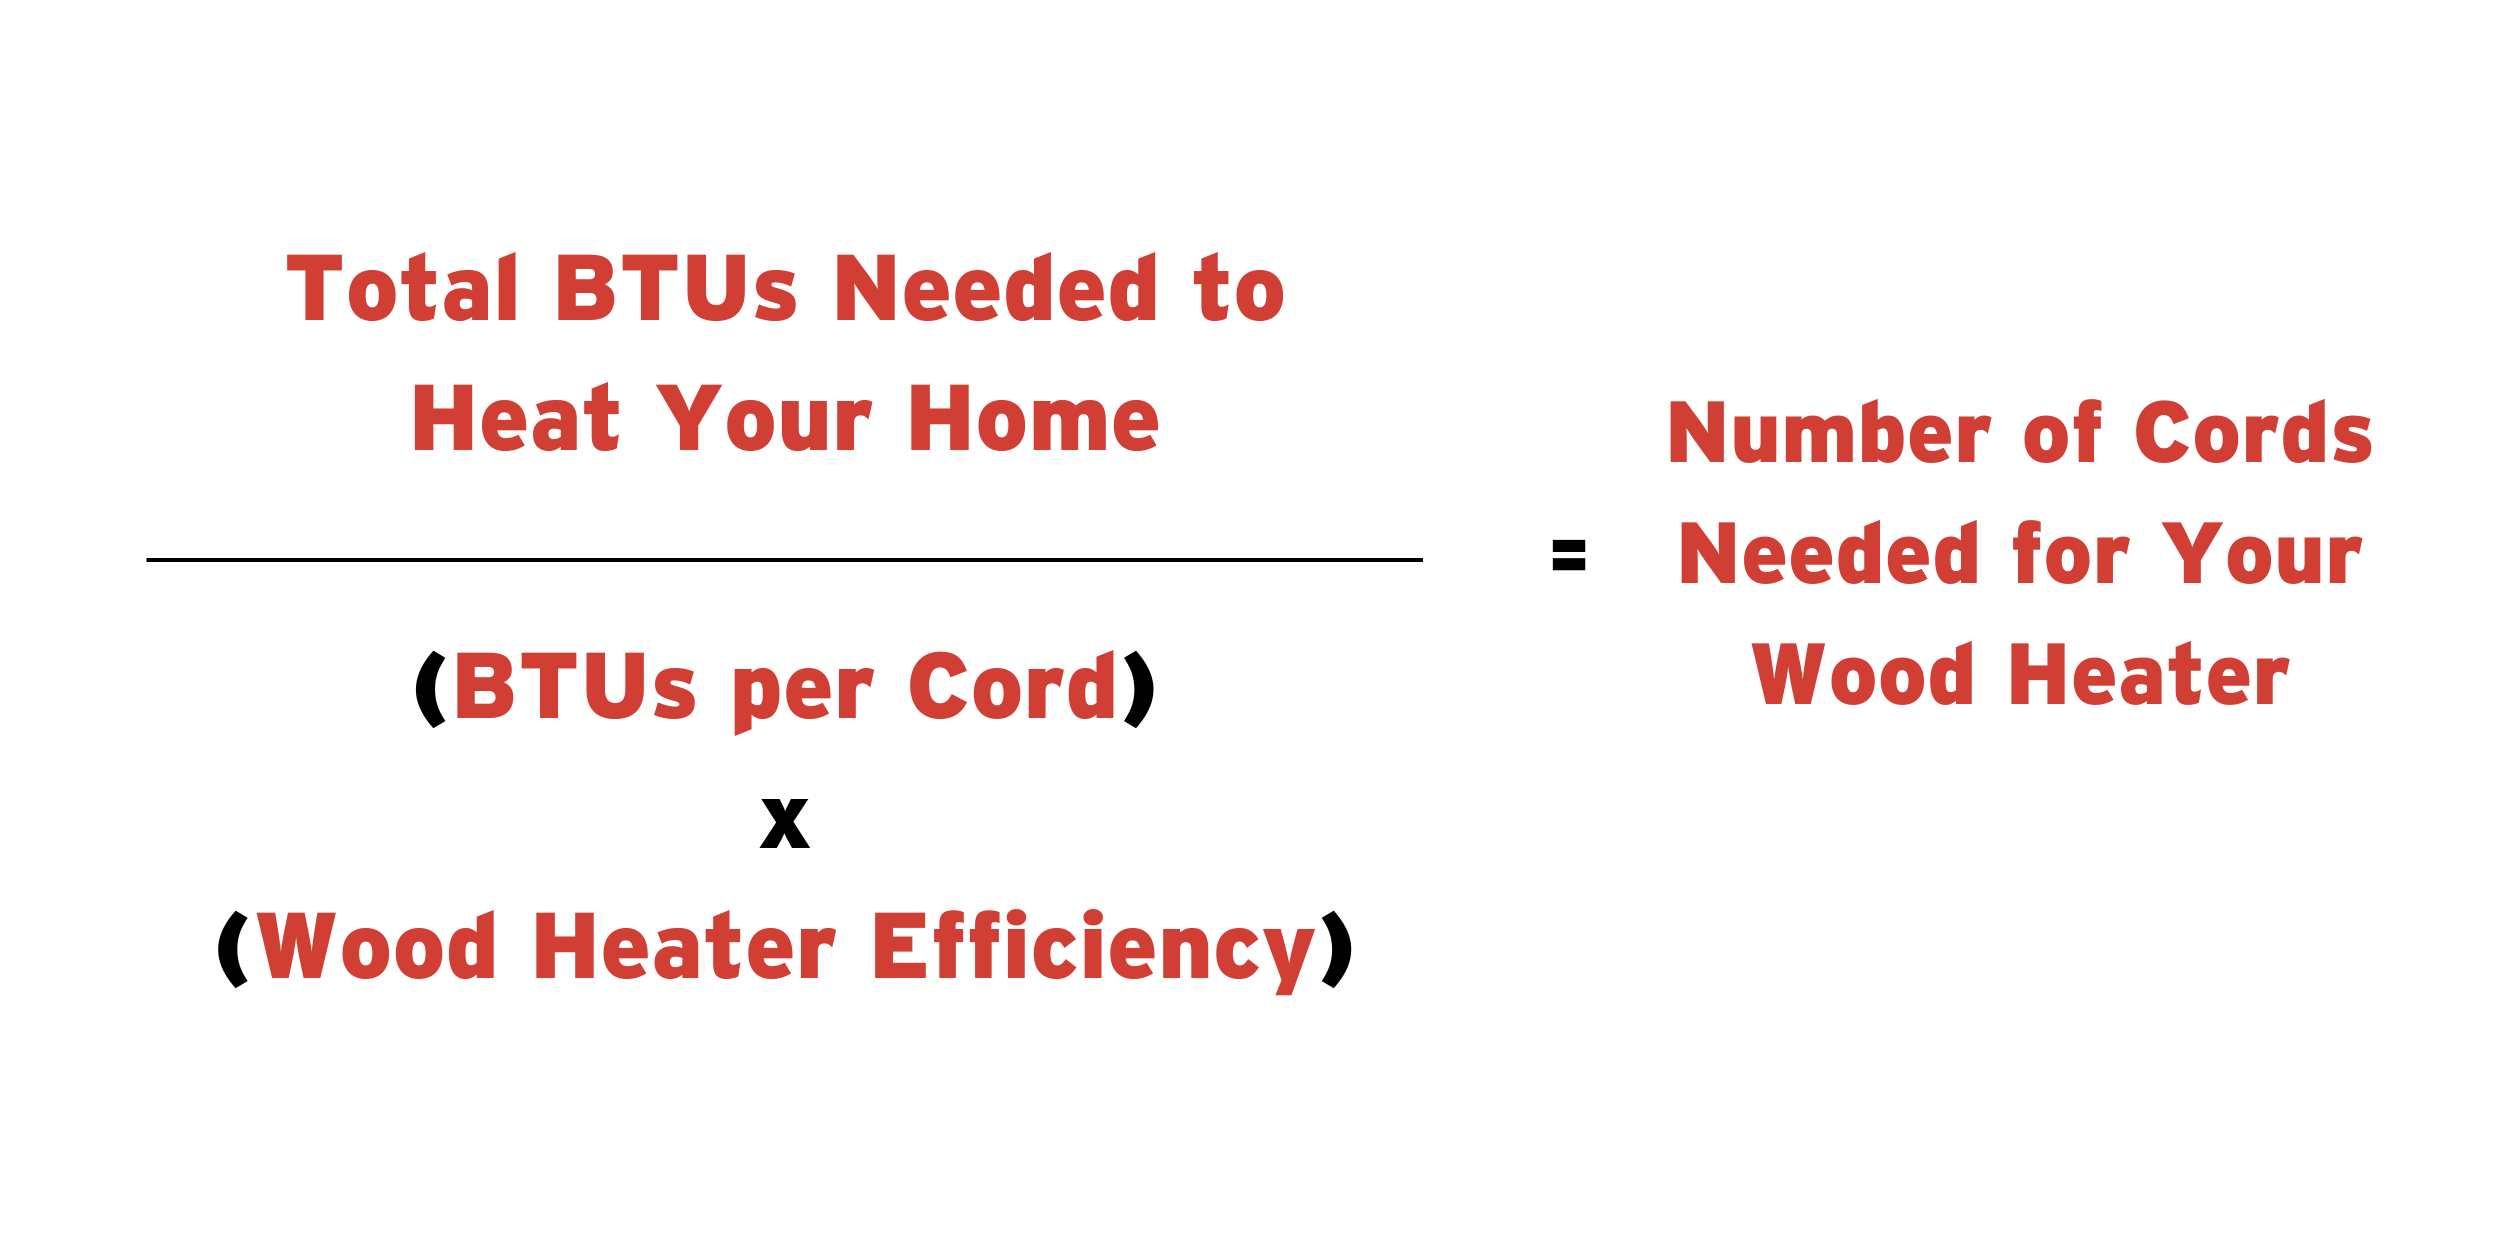 The formula for calculating the number of cords of firewood you need (total BTUs divided by BTUs per cords times wood heater efficiency).